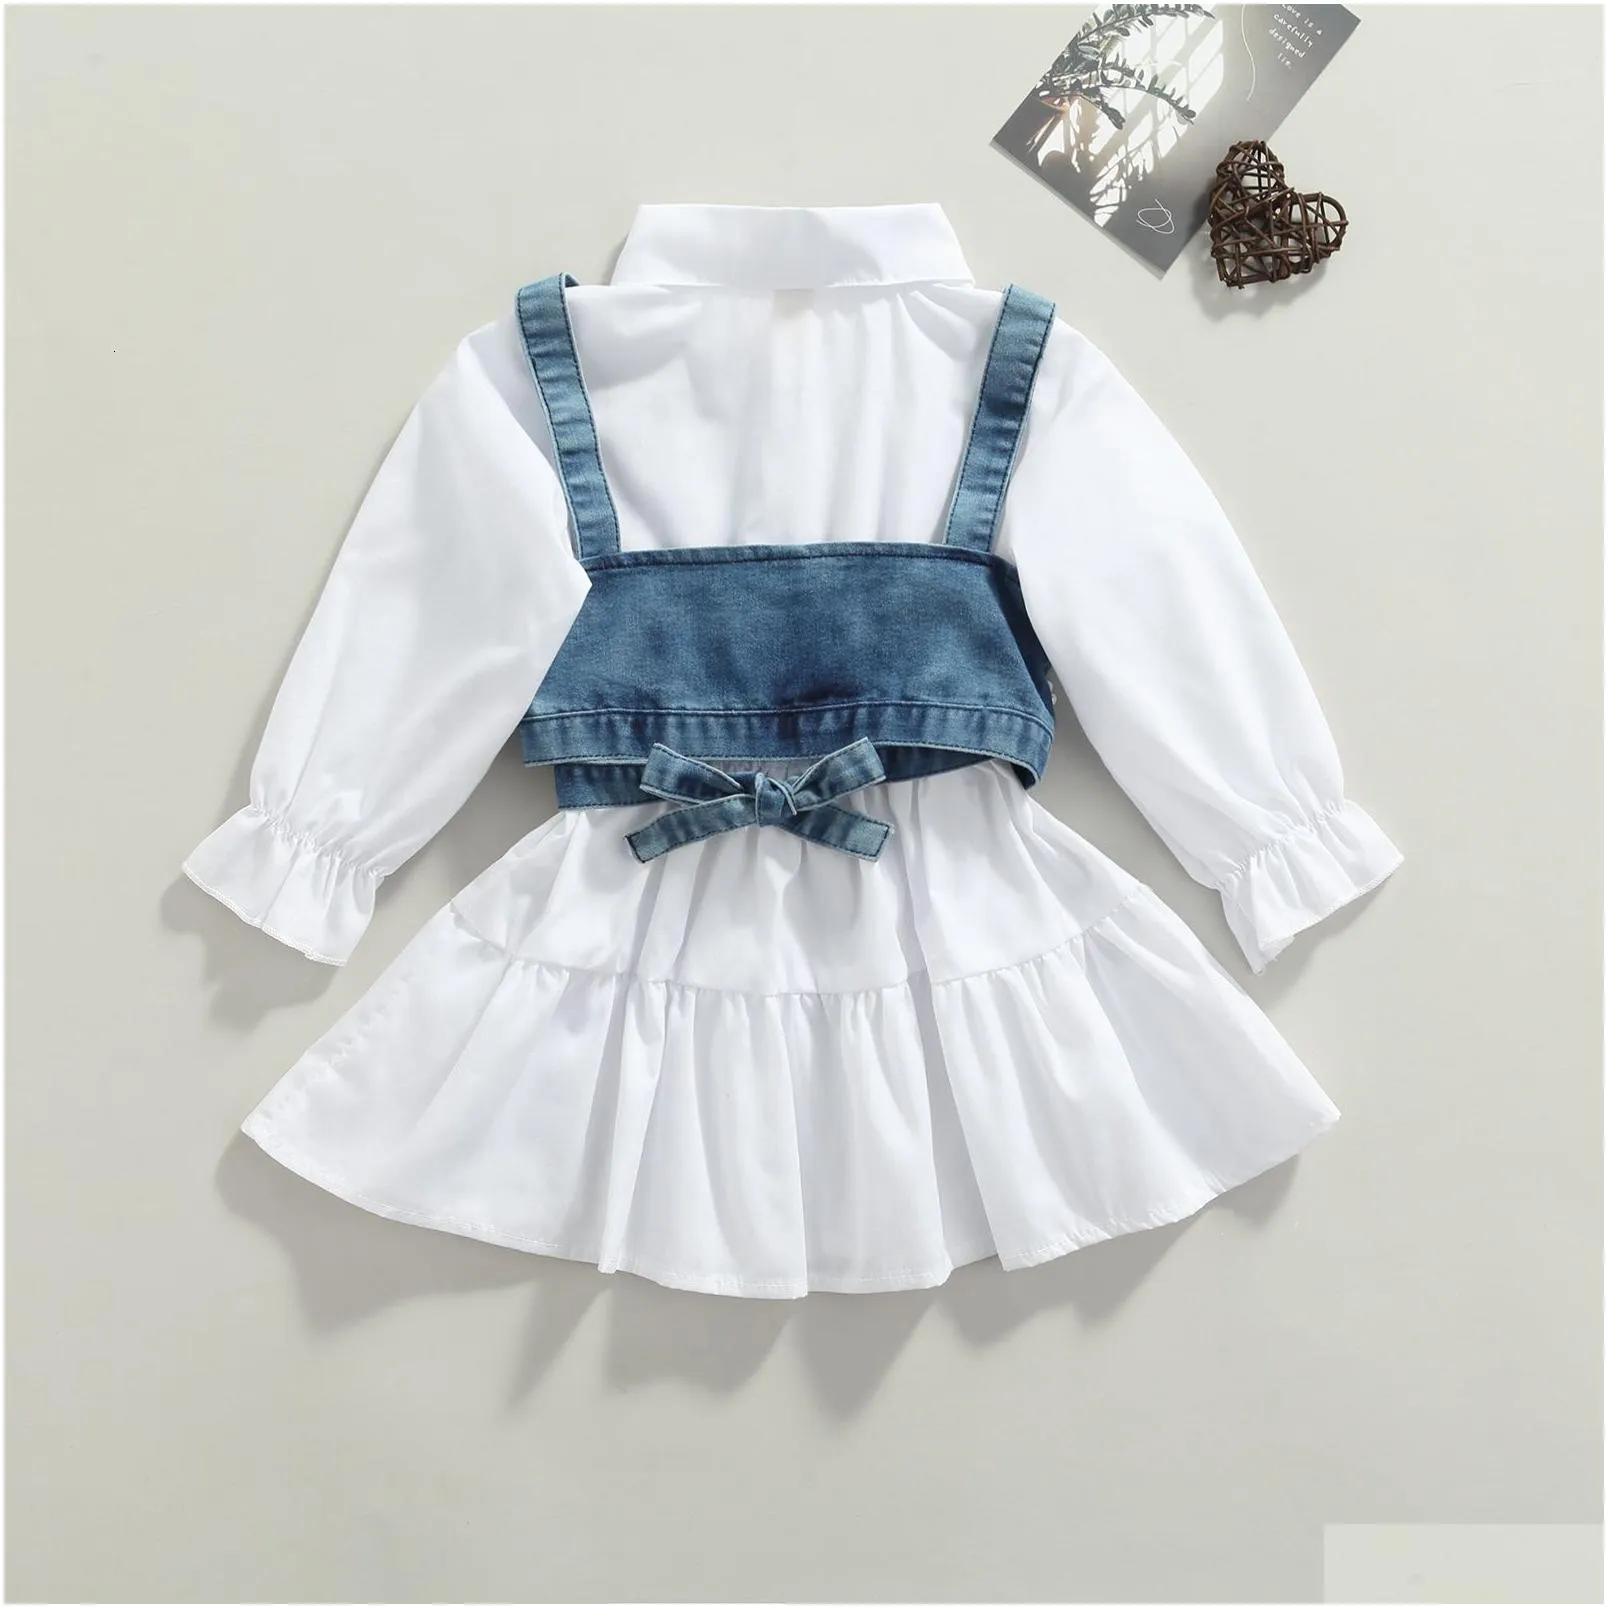 clothing sets fashion children baby girl clothes solid color long sleeve shirt dress denim beading vest 2pcs outfits 230523